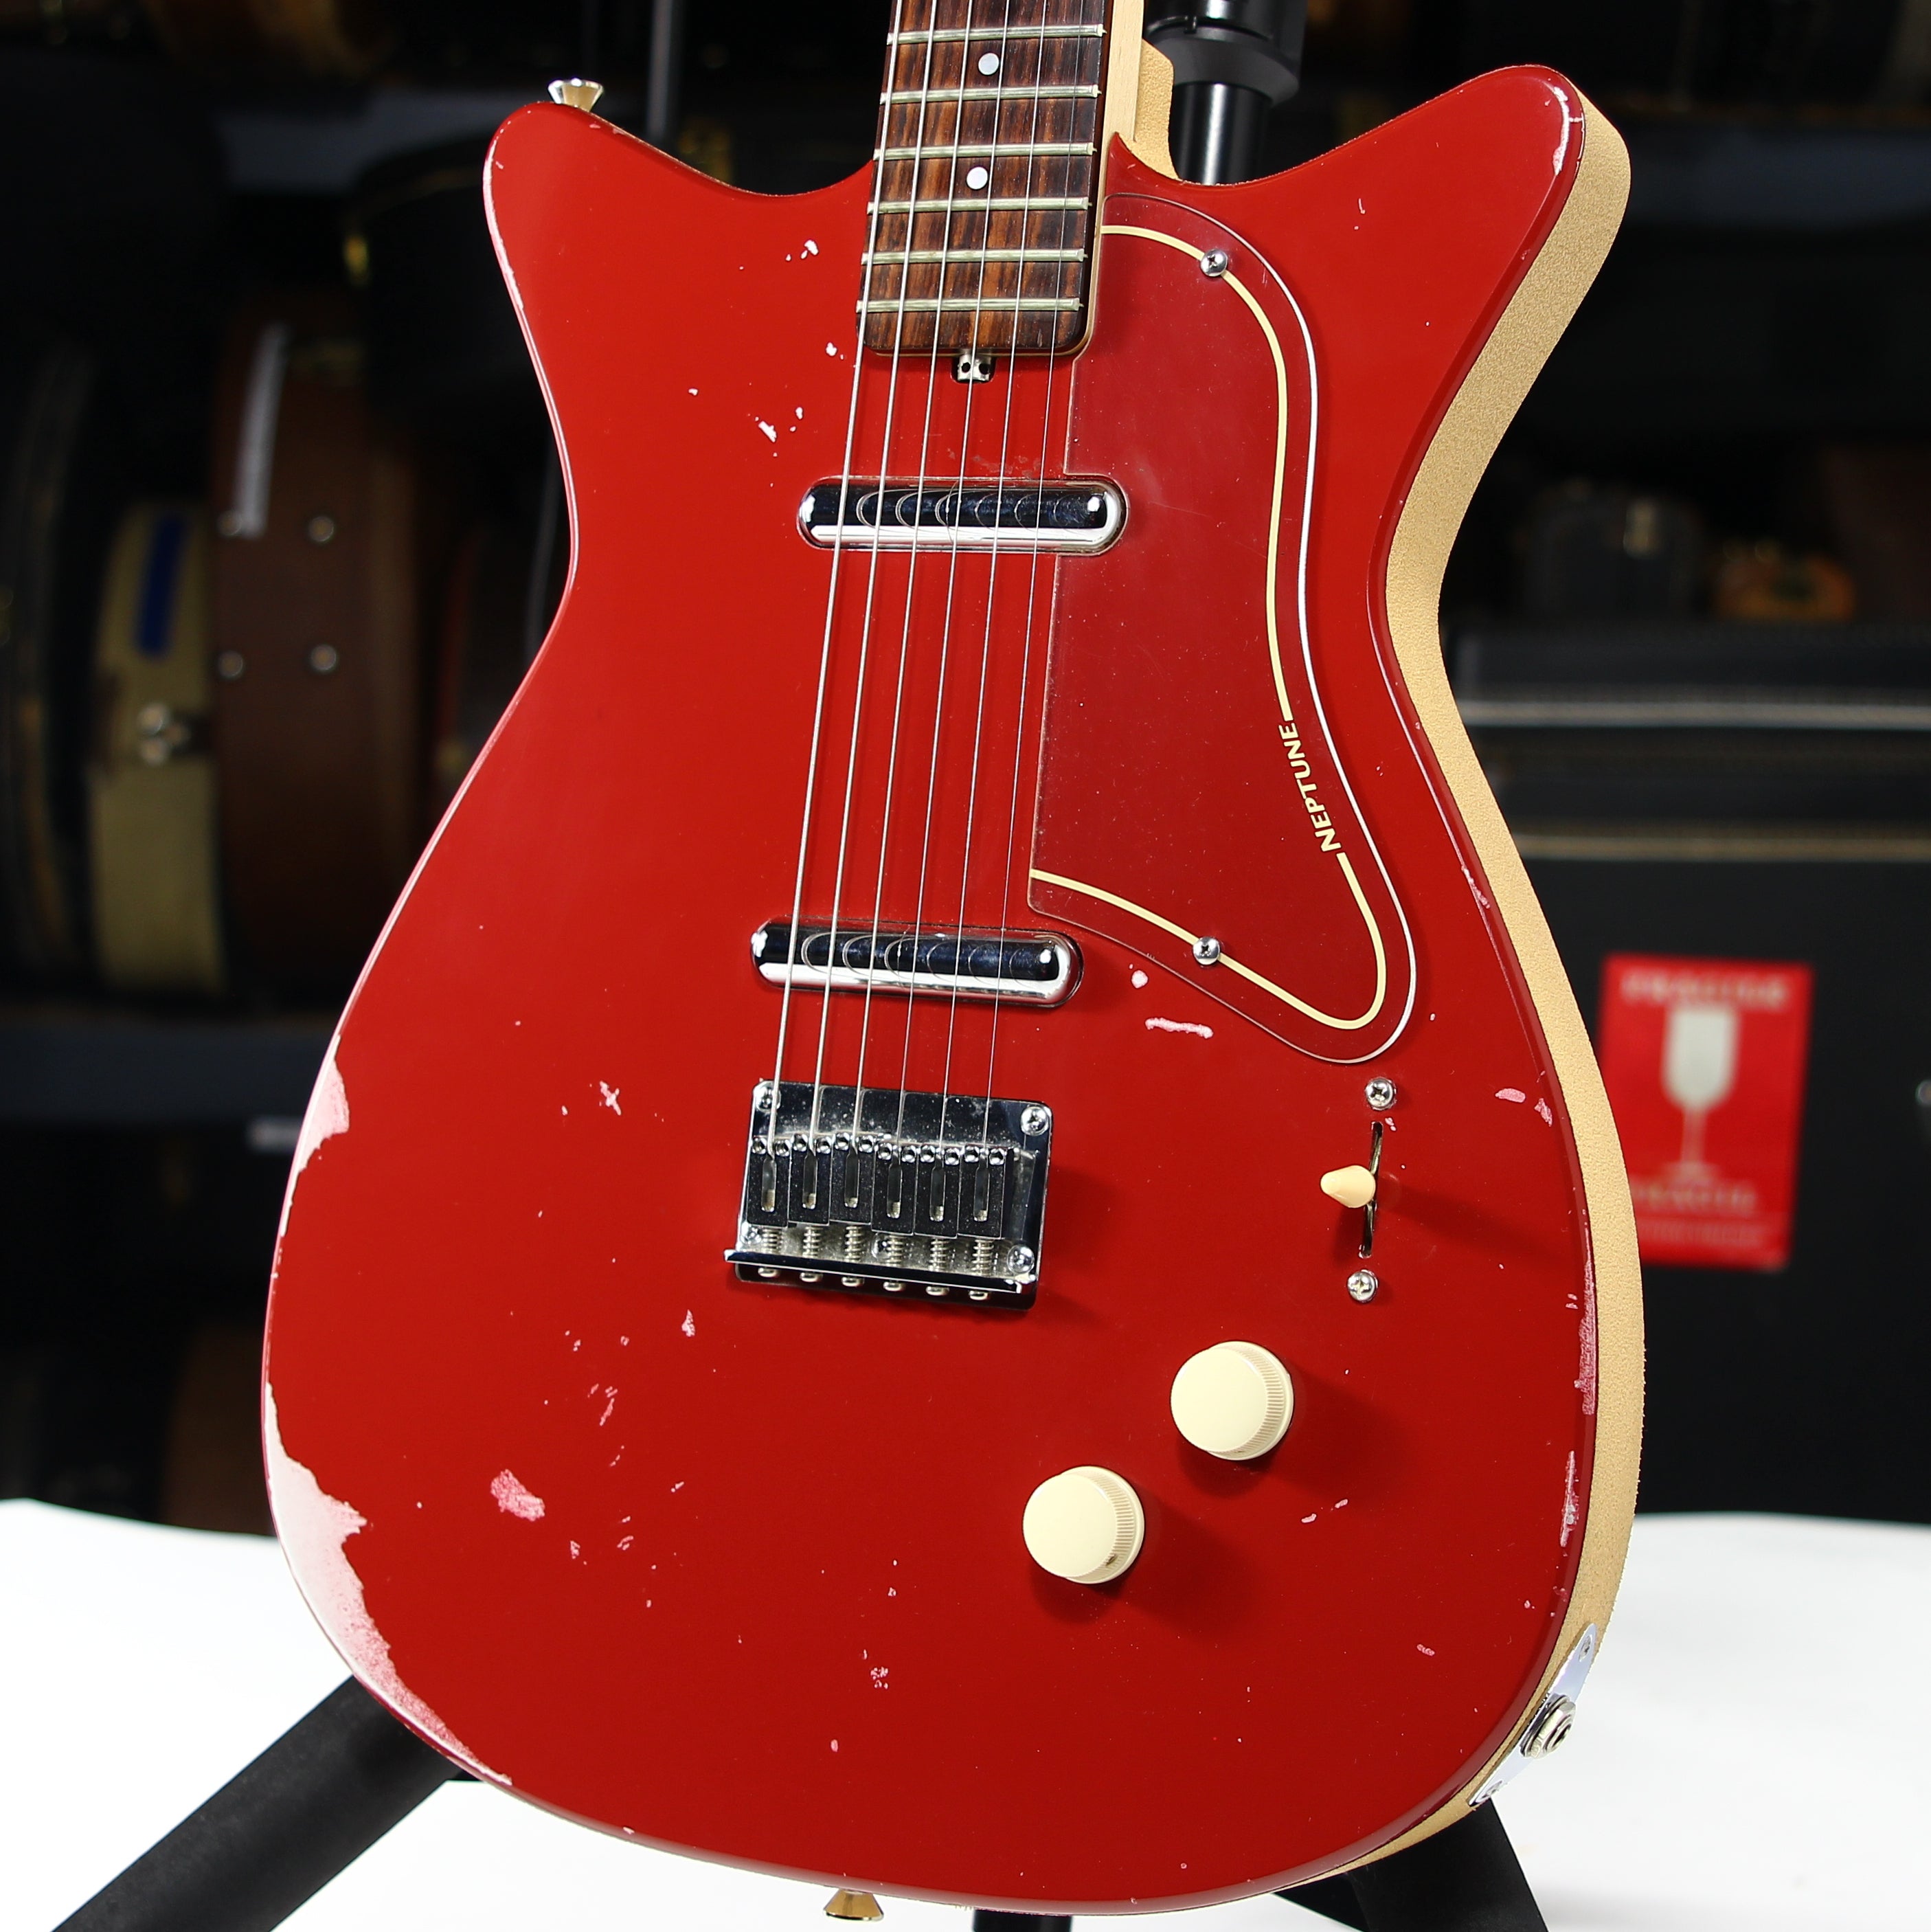 *SOLD*  Jerry Jones Neptune Shorthorn 2 Pickup Guitar - Cool Relic! Red, Lipstick Pickups! Jimmy Page Sounds!